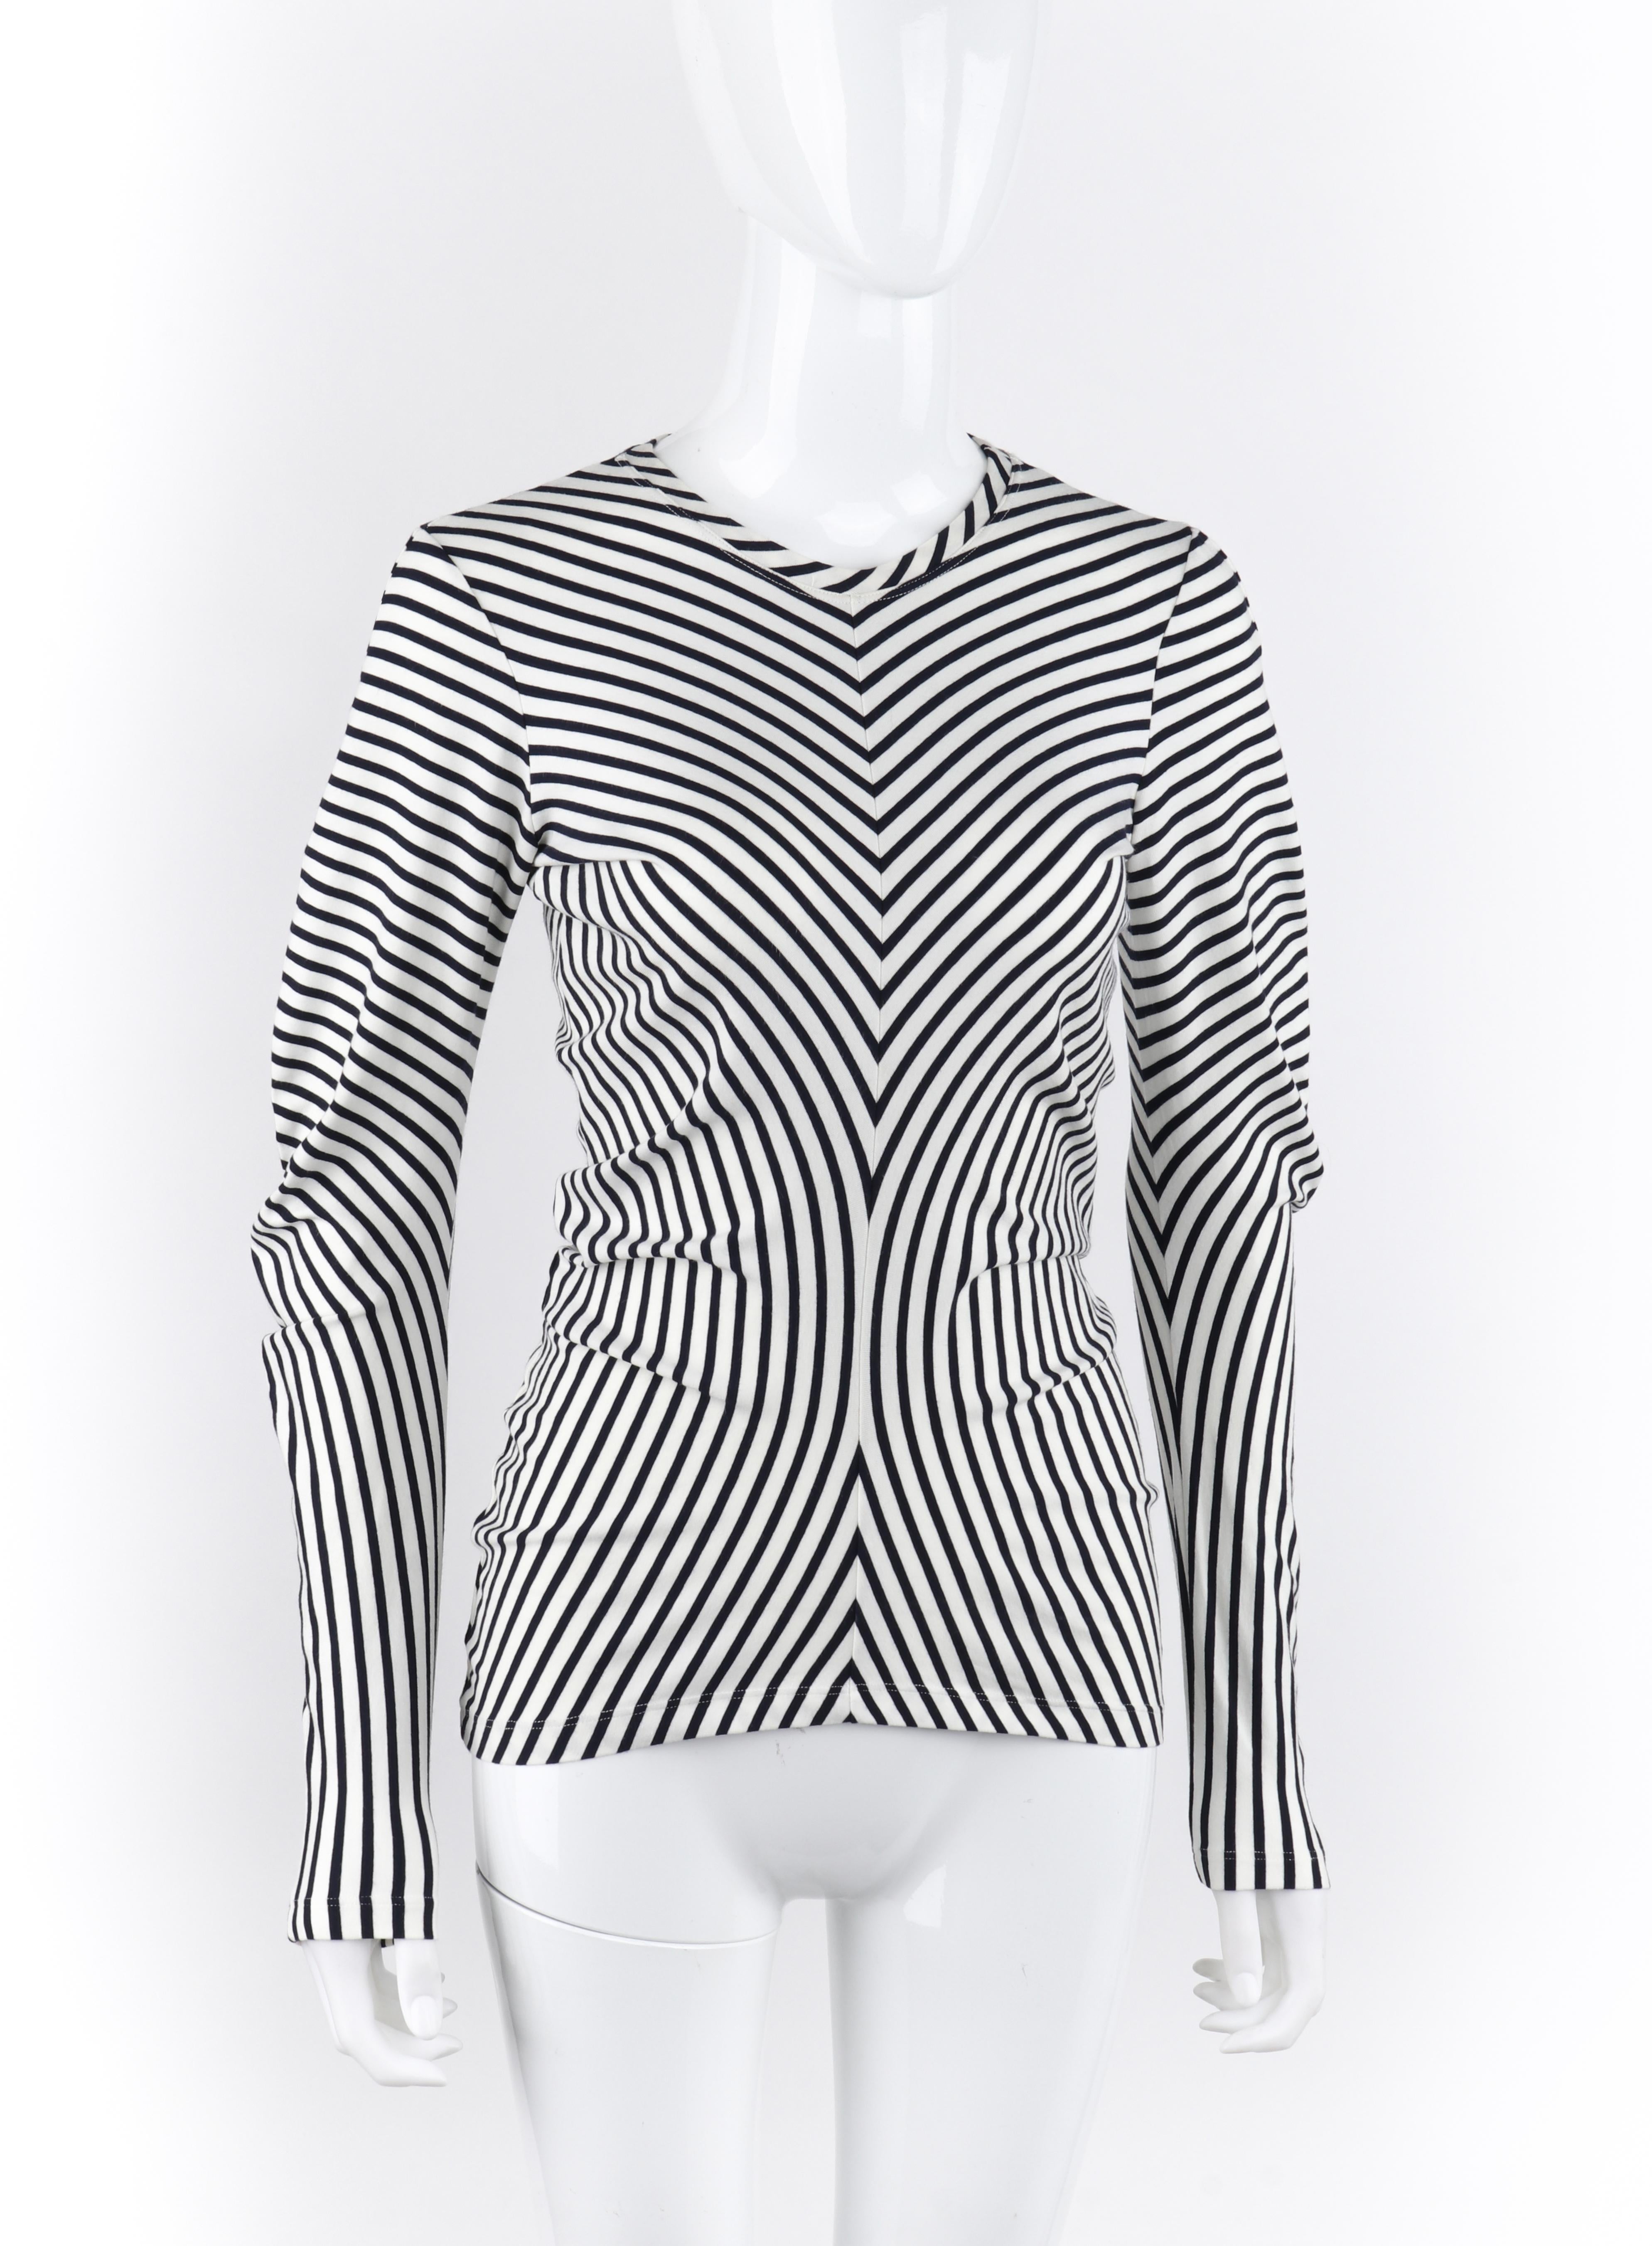 ALEXANDER McQUEEN S/S 2006 Blue White Stripe Knit Curve Long Sleeve Draped Top In Good Condition For Sale In Thiensville, WI